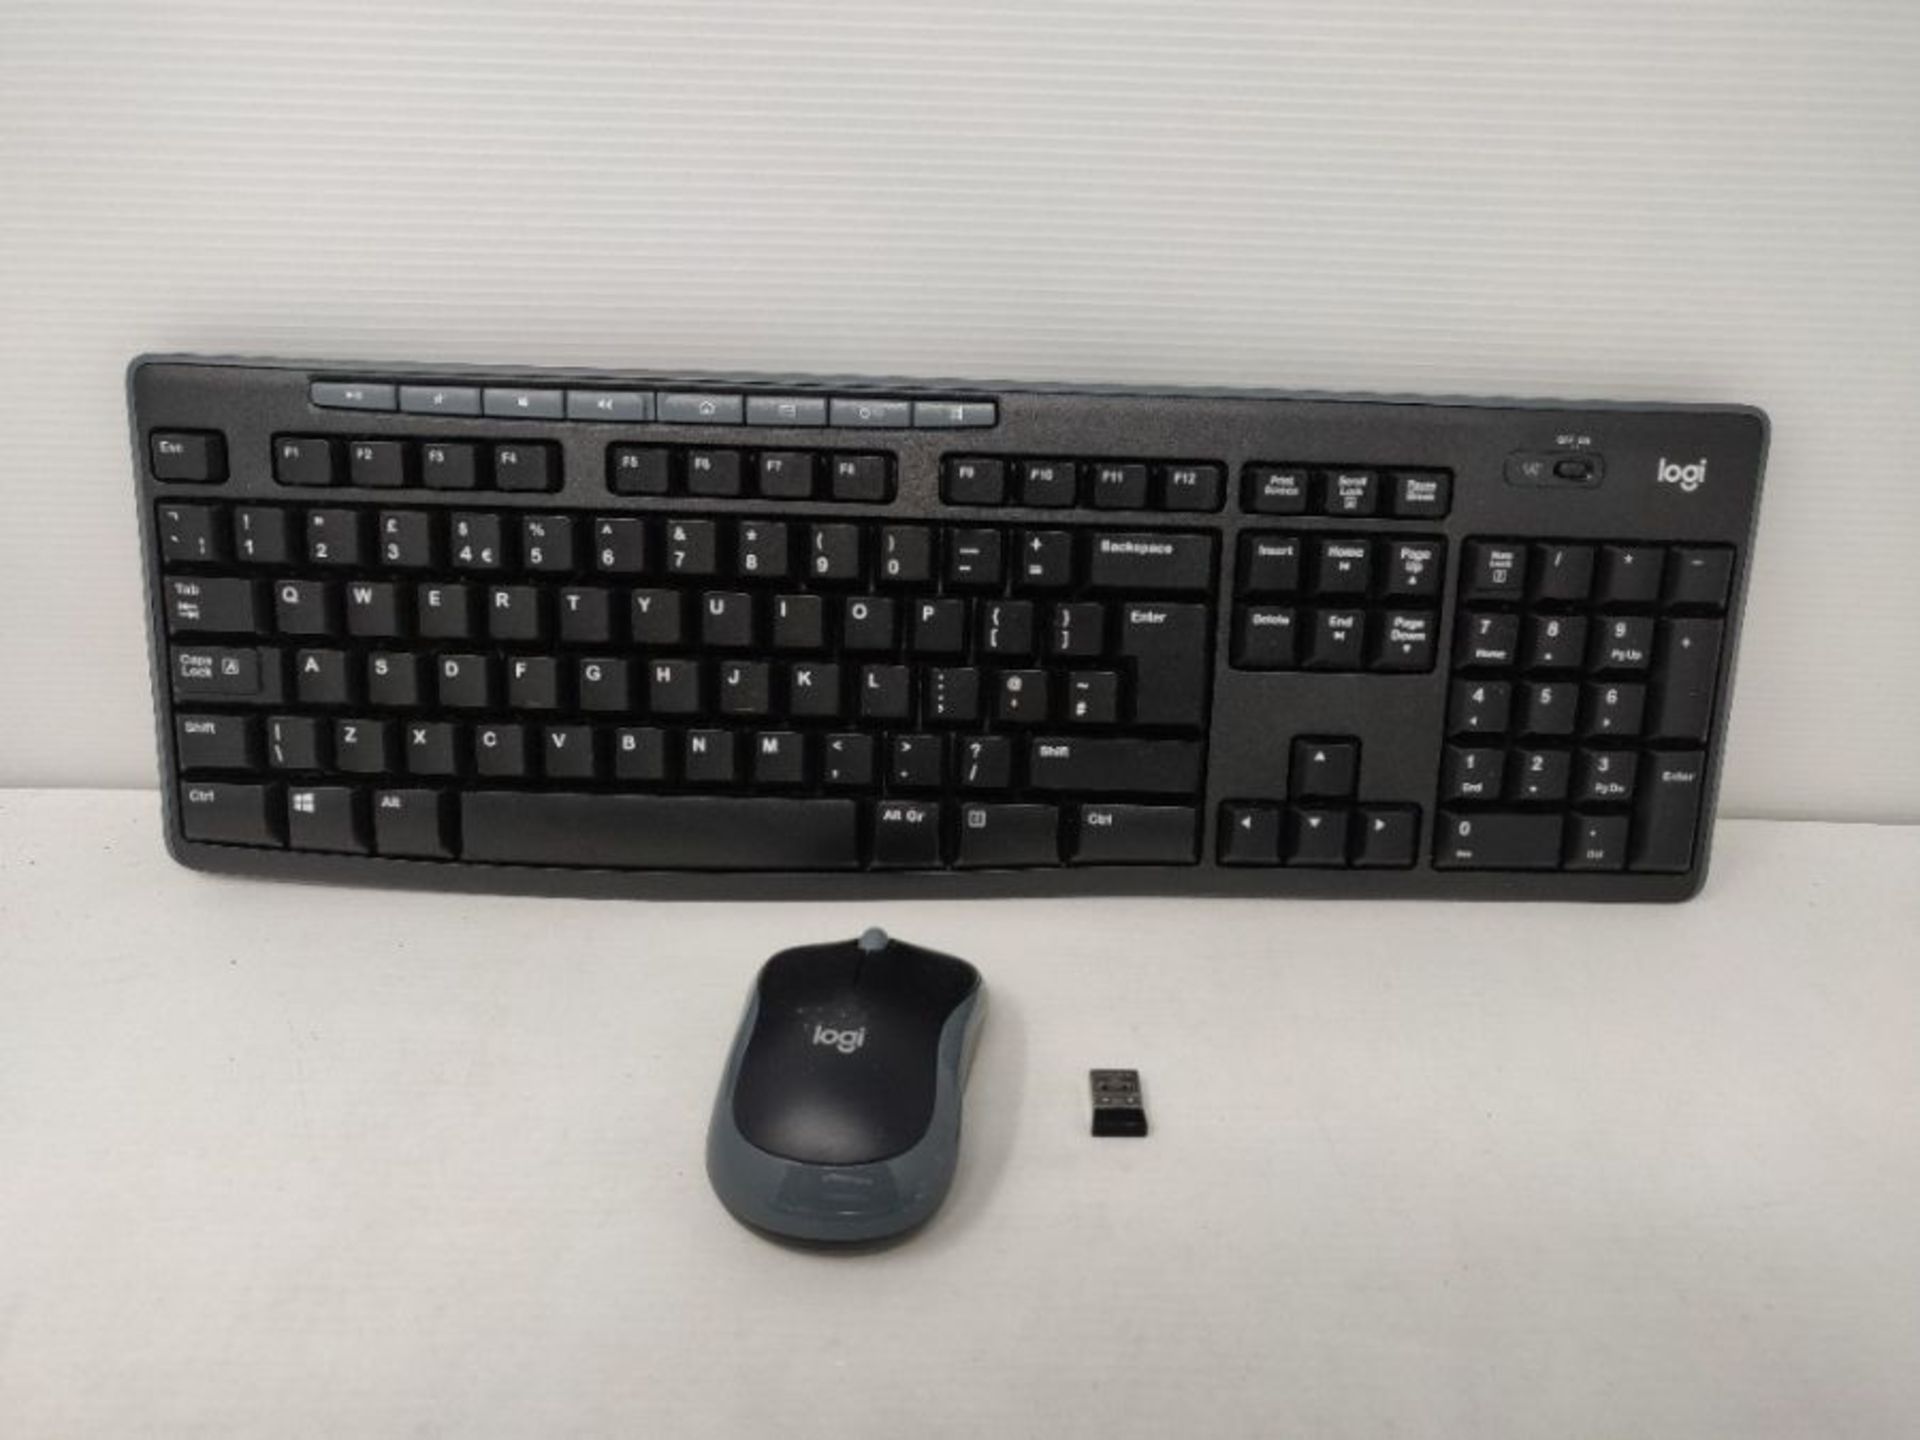 Logitech MK270 Wireless Keyboard and Mouse Combo for Windows, 2.4 GHz Wireless, Compac - Image 3 of 3